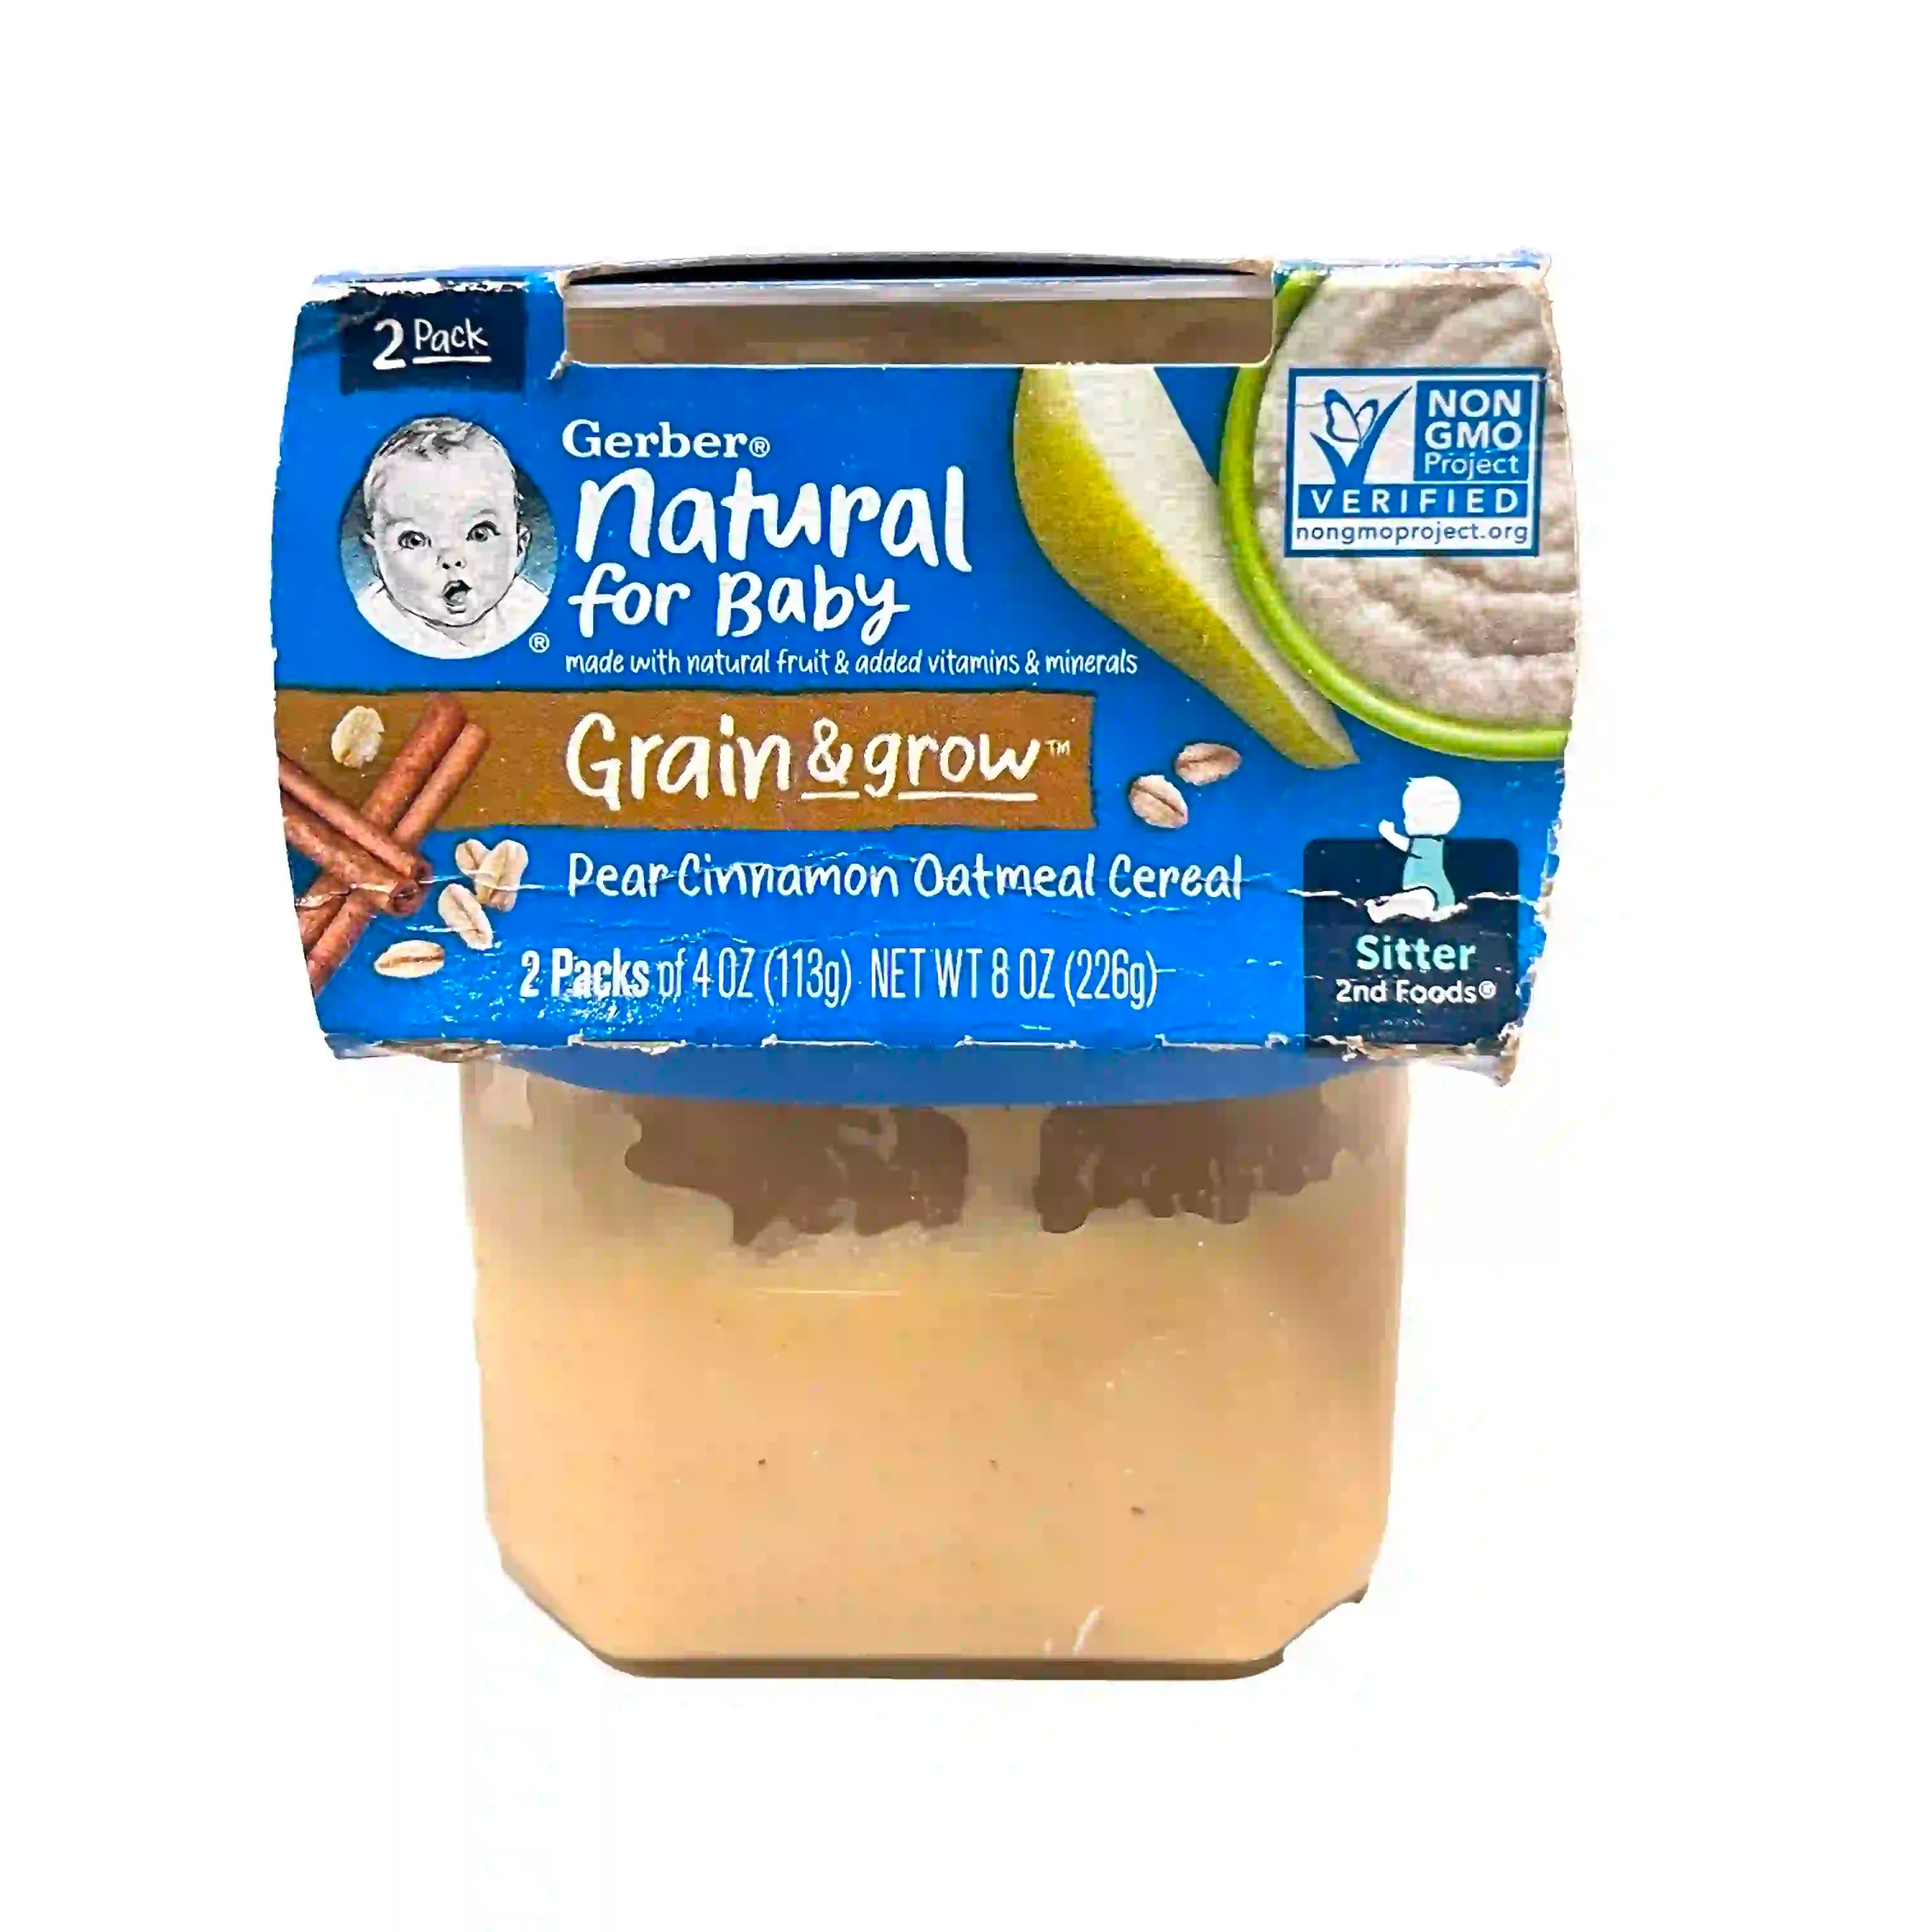 Buy Gerber Oatmeal Cereal Puree with Pear & Cinnamon Online in India at uyyaala.com